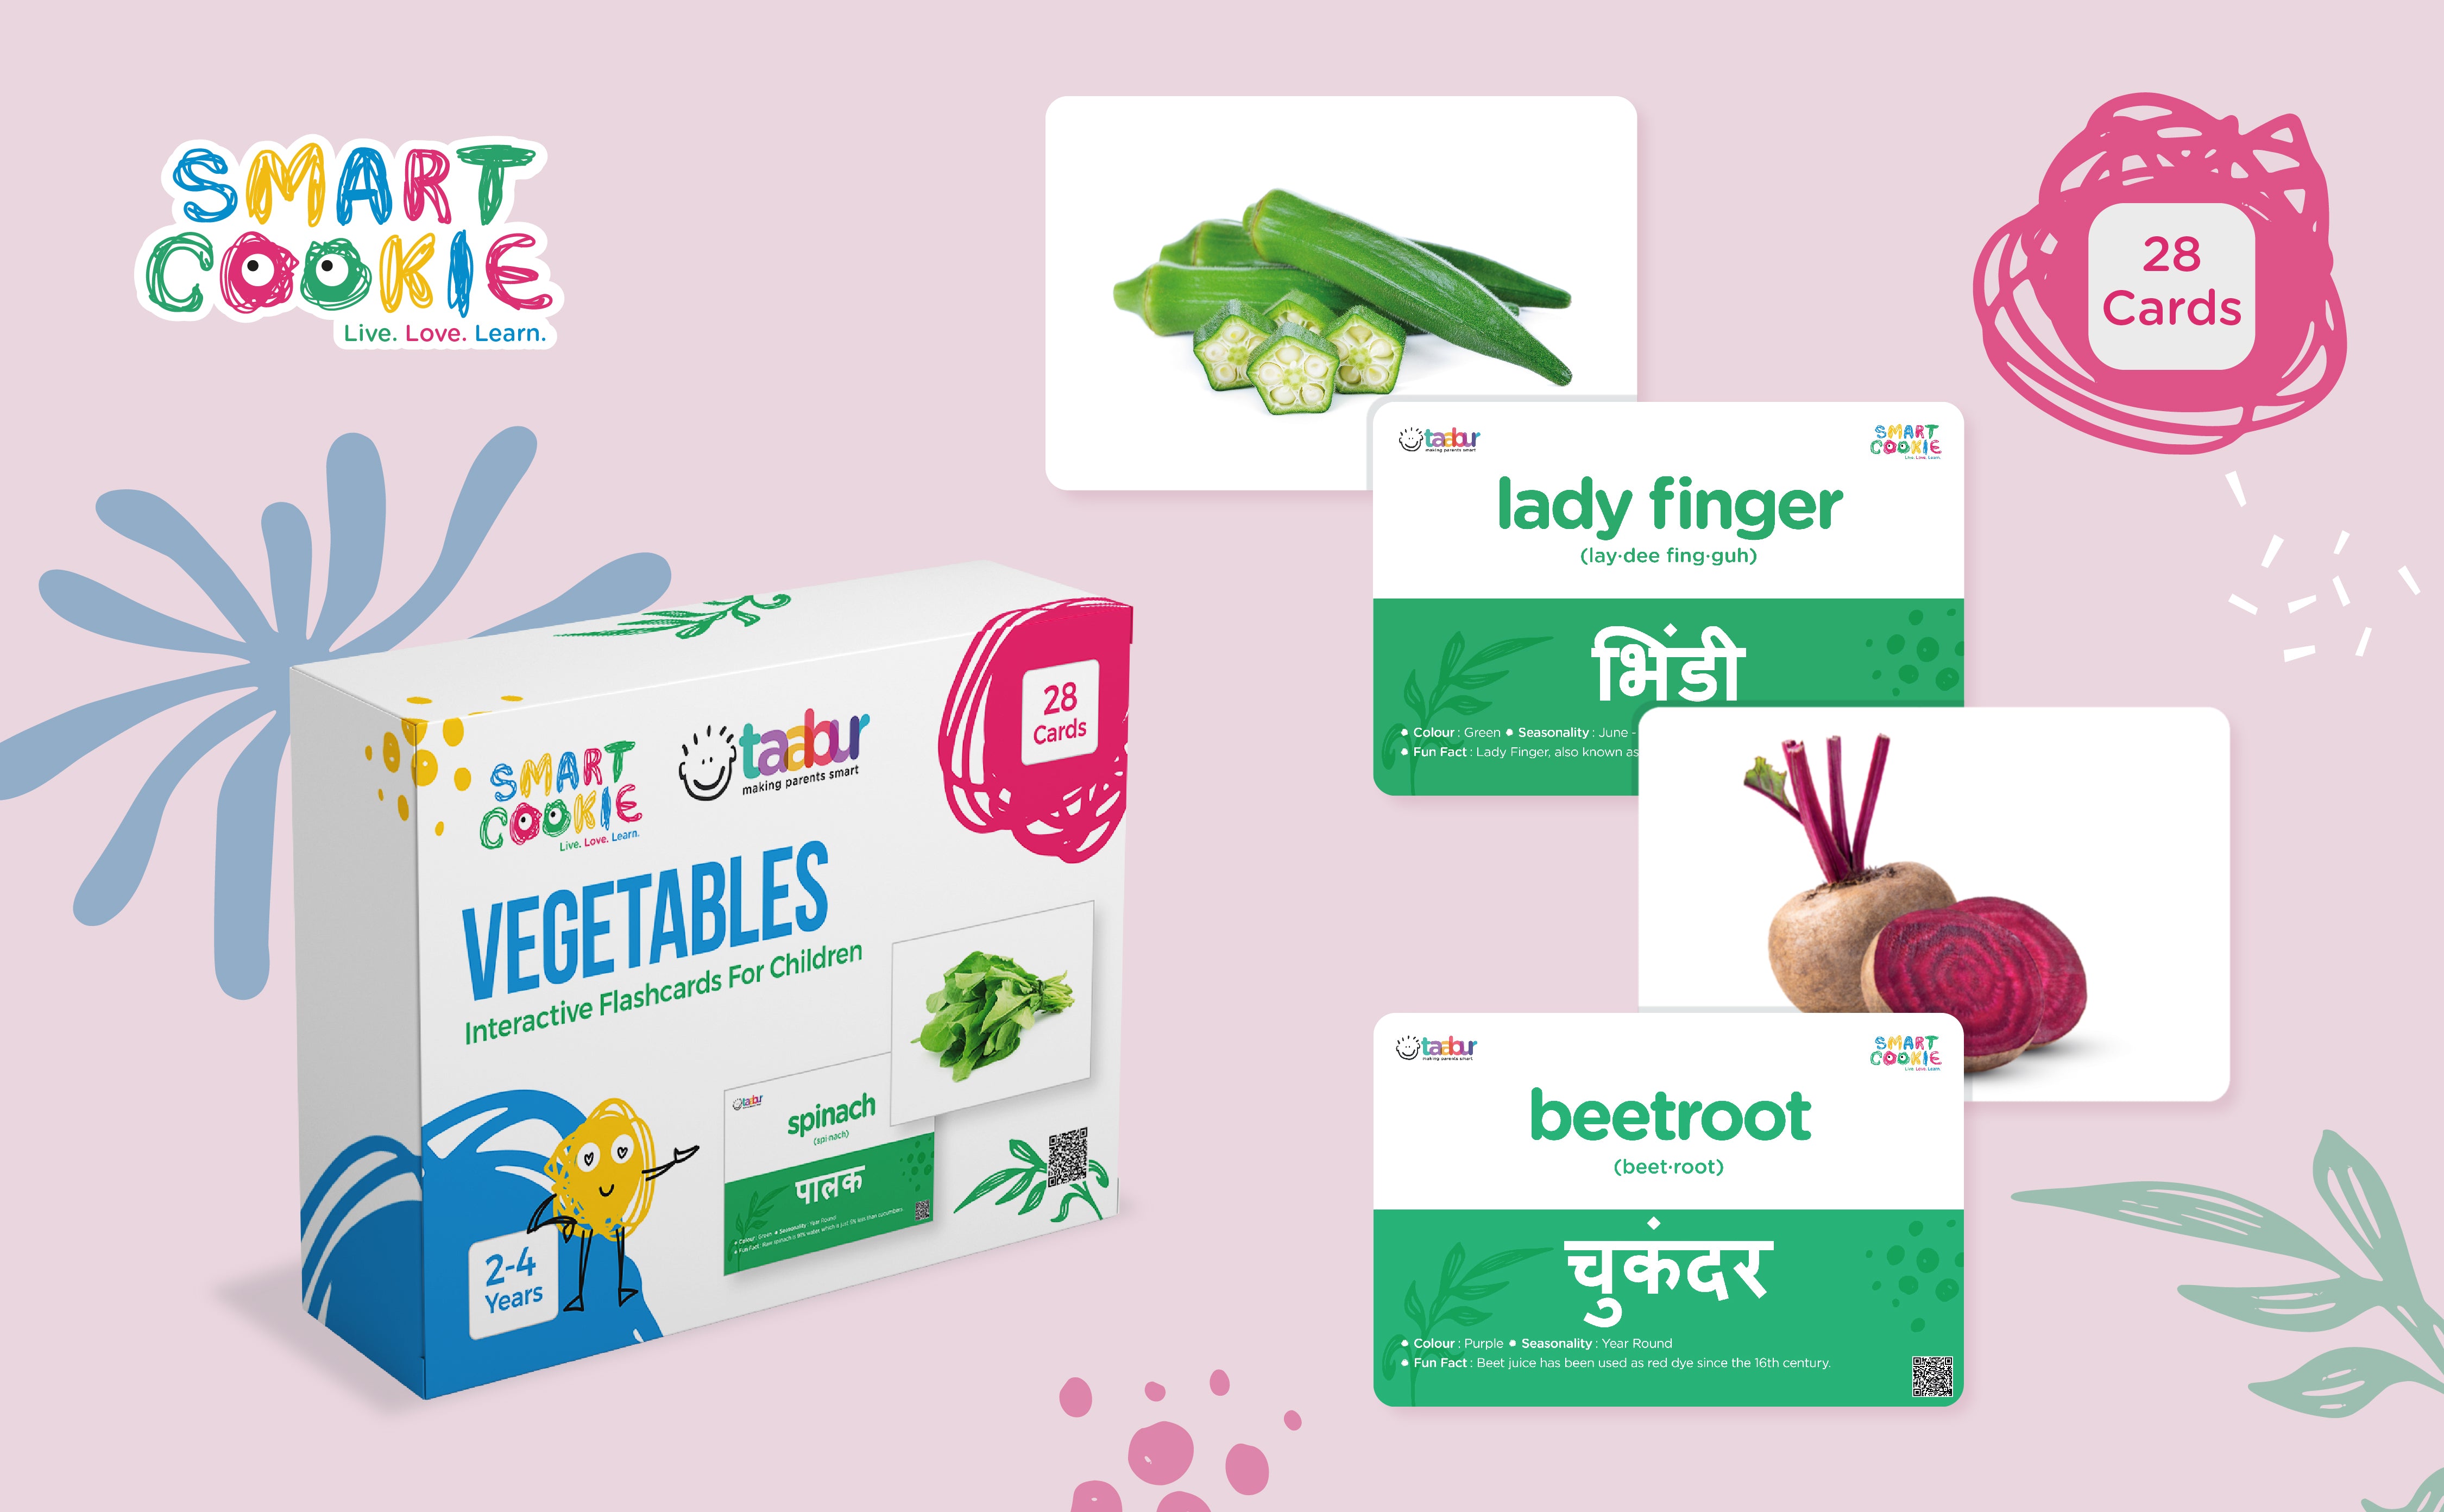 Vegetables - Interactive Flashcards for Children (28 Cards) - for Kids Aged 2 to 4 Years Old